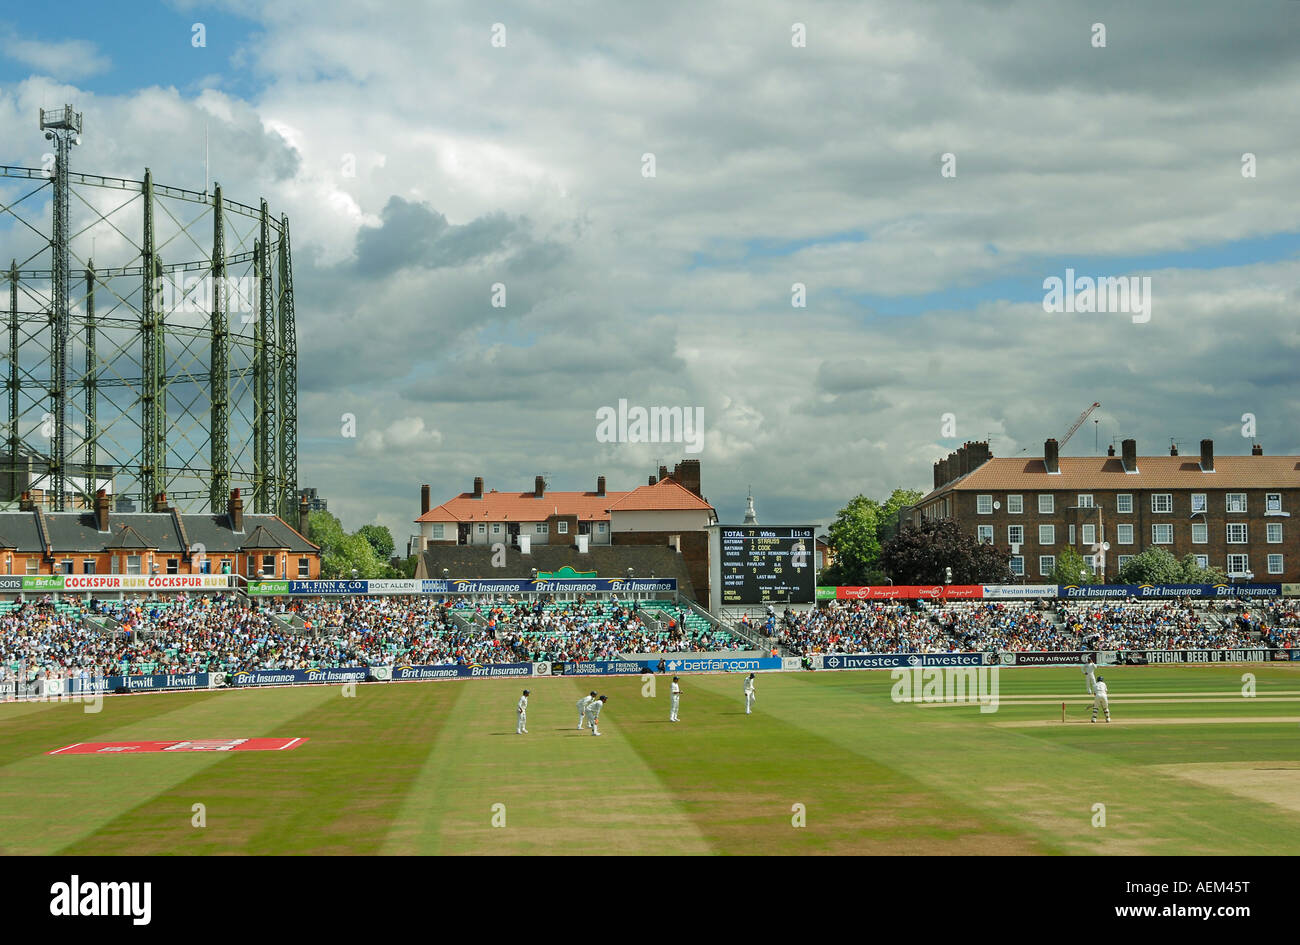 View of the Oval Cricket Ground in London during an England versus India Test Match Stock Photo